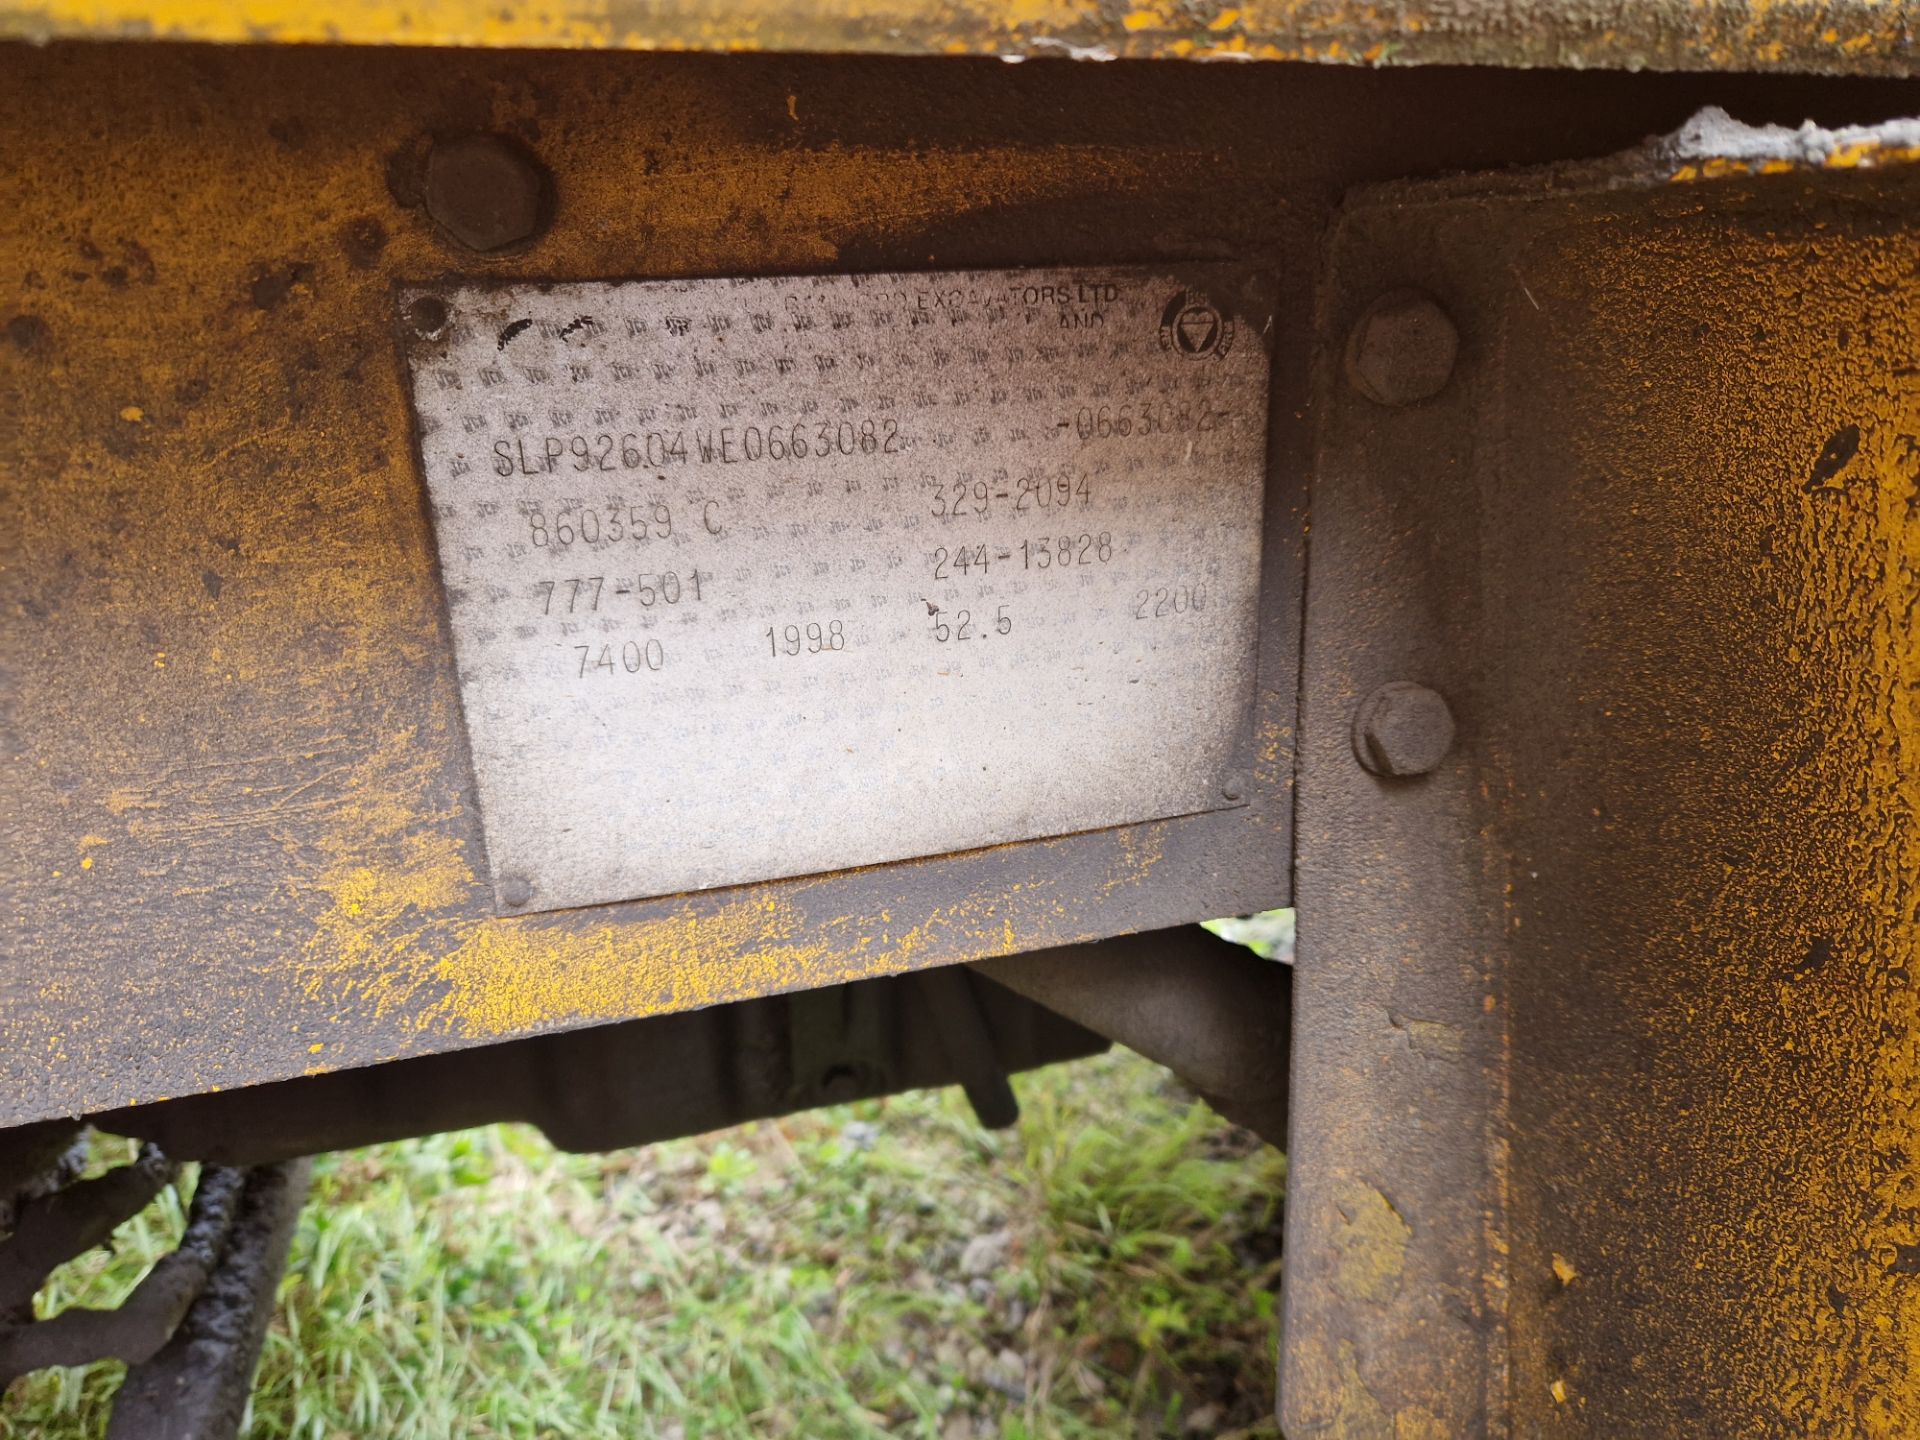 JCB 926 Rough Terrain Fork Lift Truck, YoM 1985, No key, Running State Unknown Please read the - Image 7 of 9